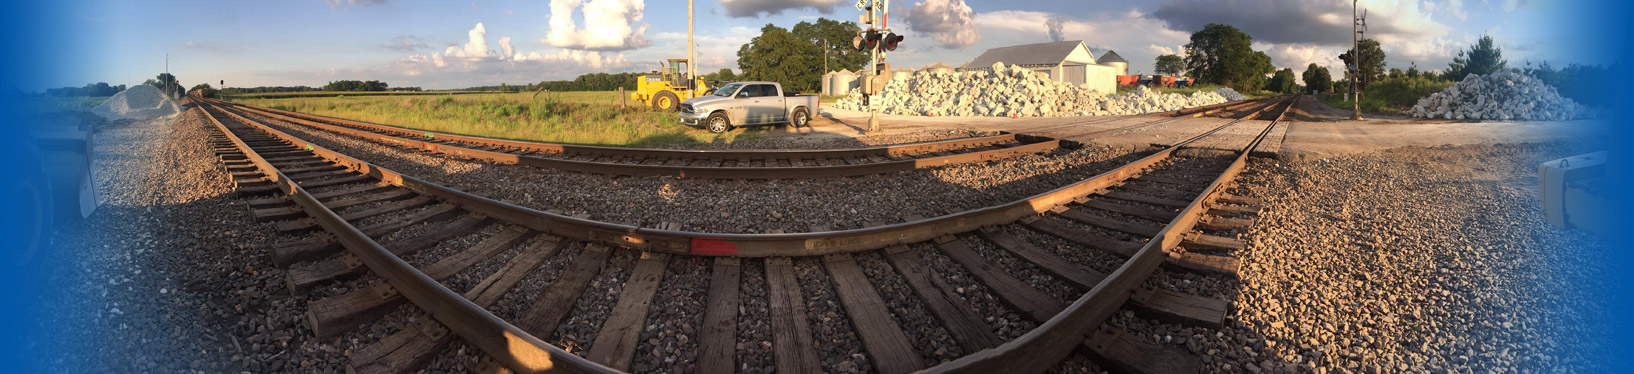 Panorama of a railroad